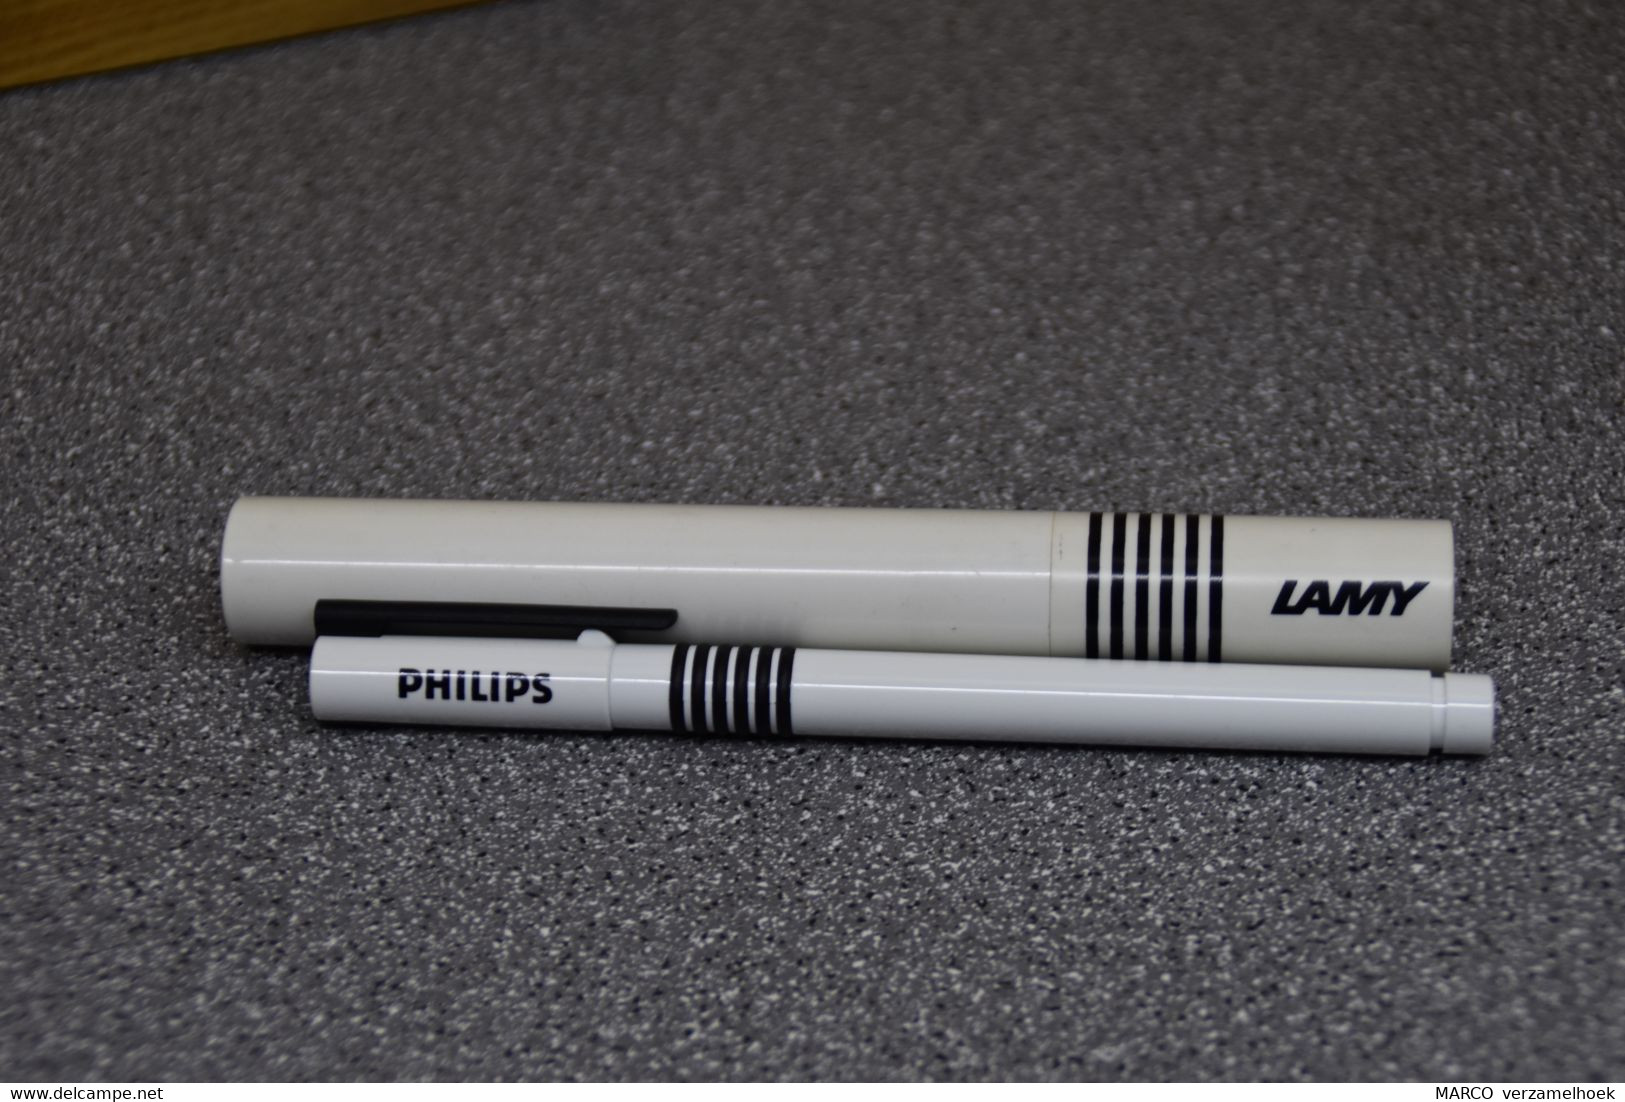 PHILIPS: Philips Matchline Television-TV (NL) LAMY - Television